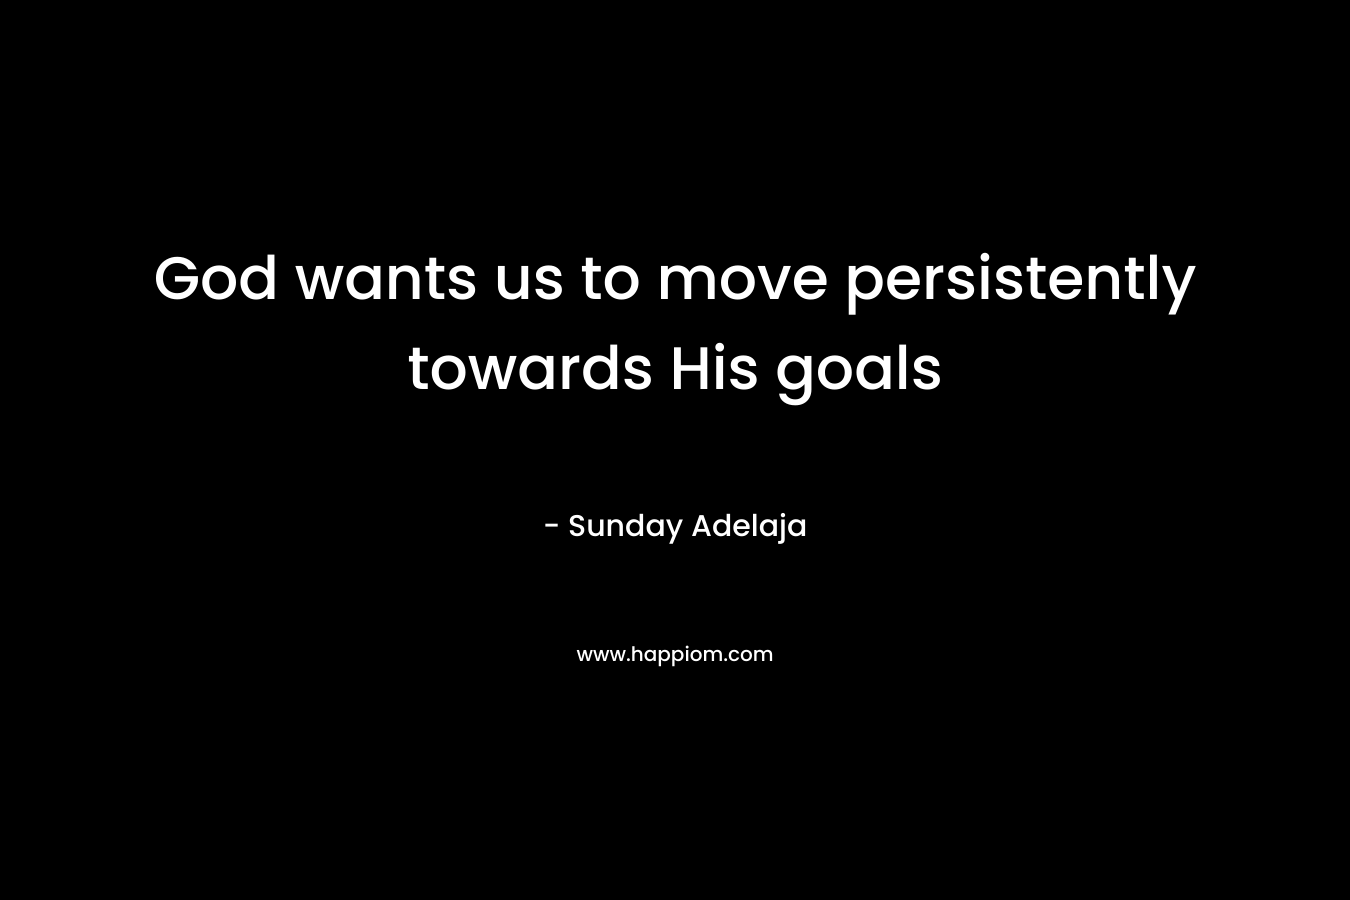 God wants us to move persistently towards His goals